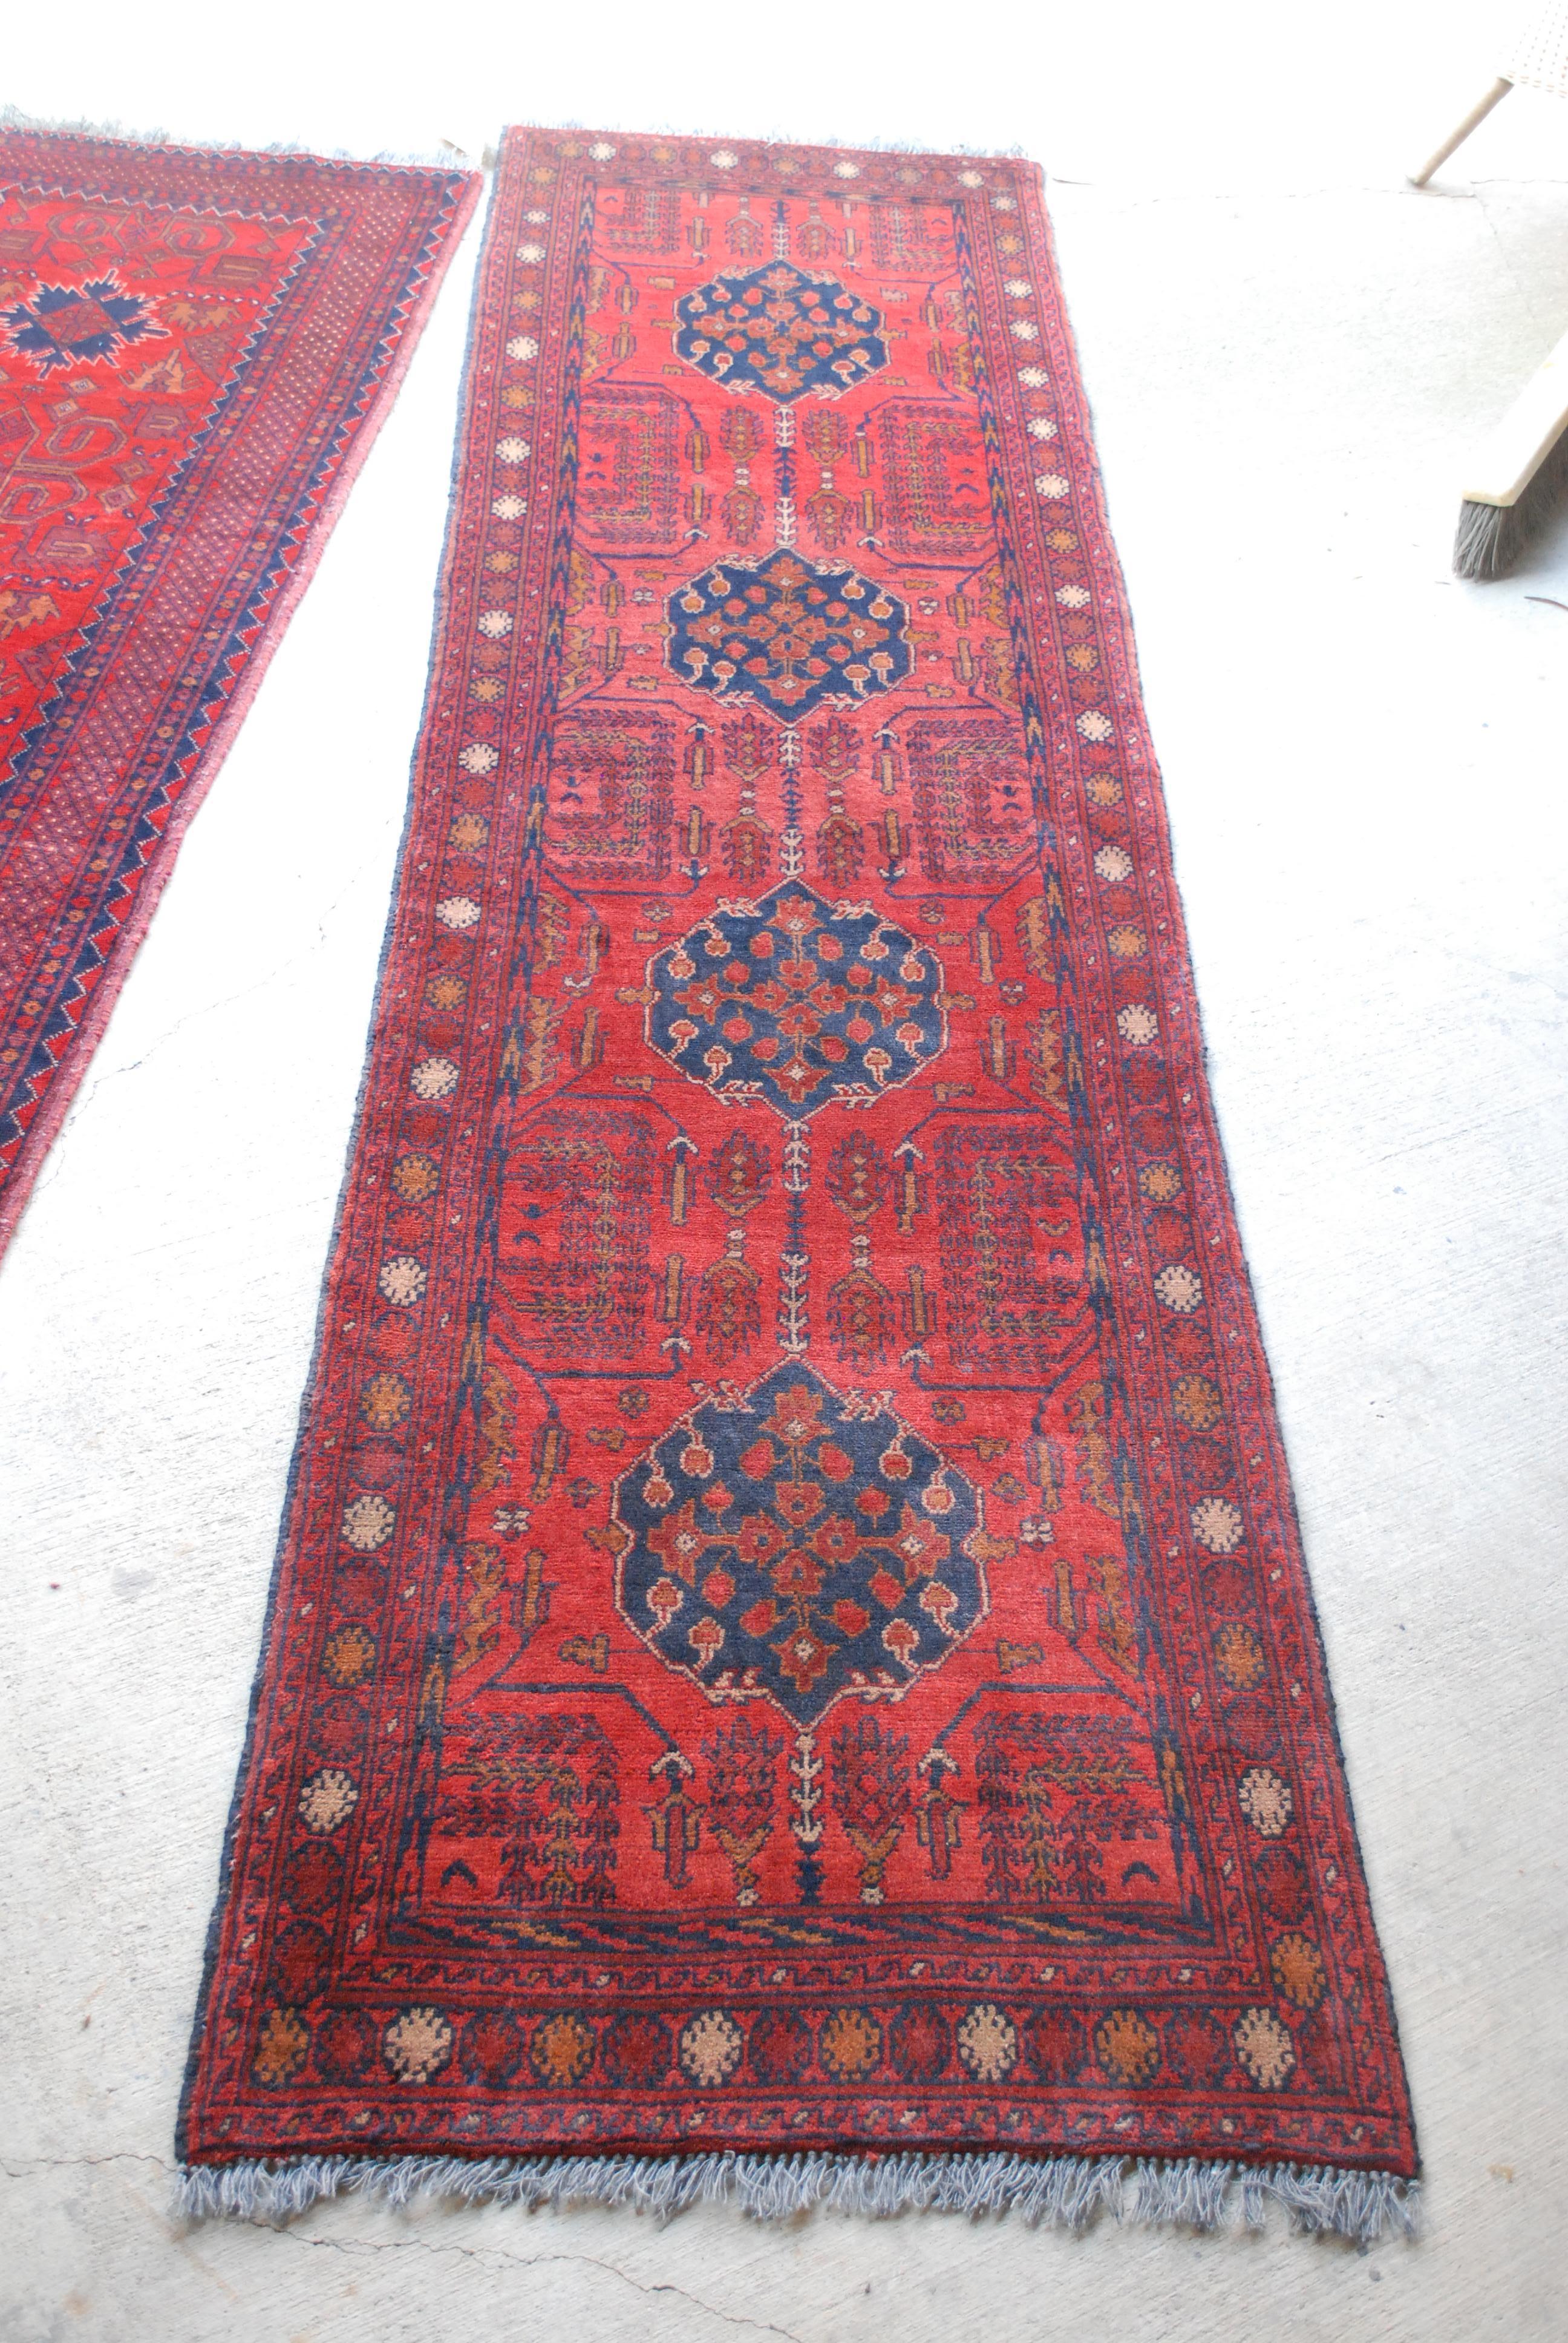 A Bohemian low-pile wool runner in rust, reds and blue accents. Hand knotted wool. Symmetrical design, great vintage condition.